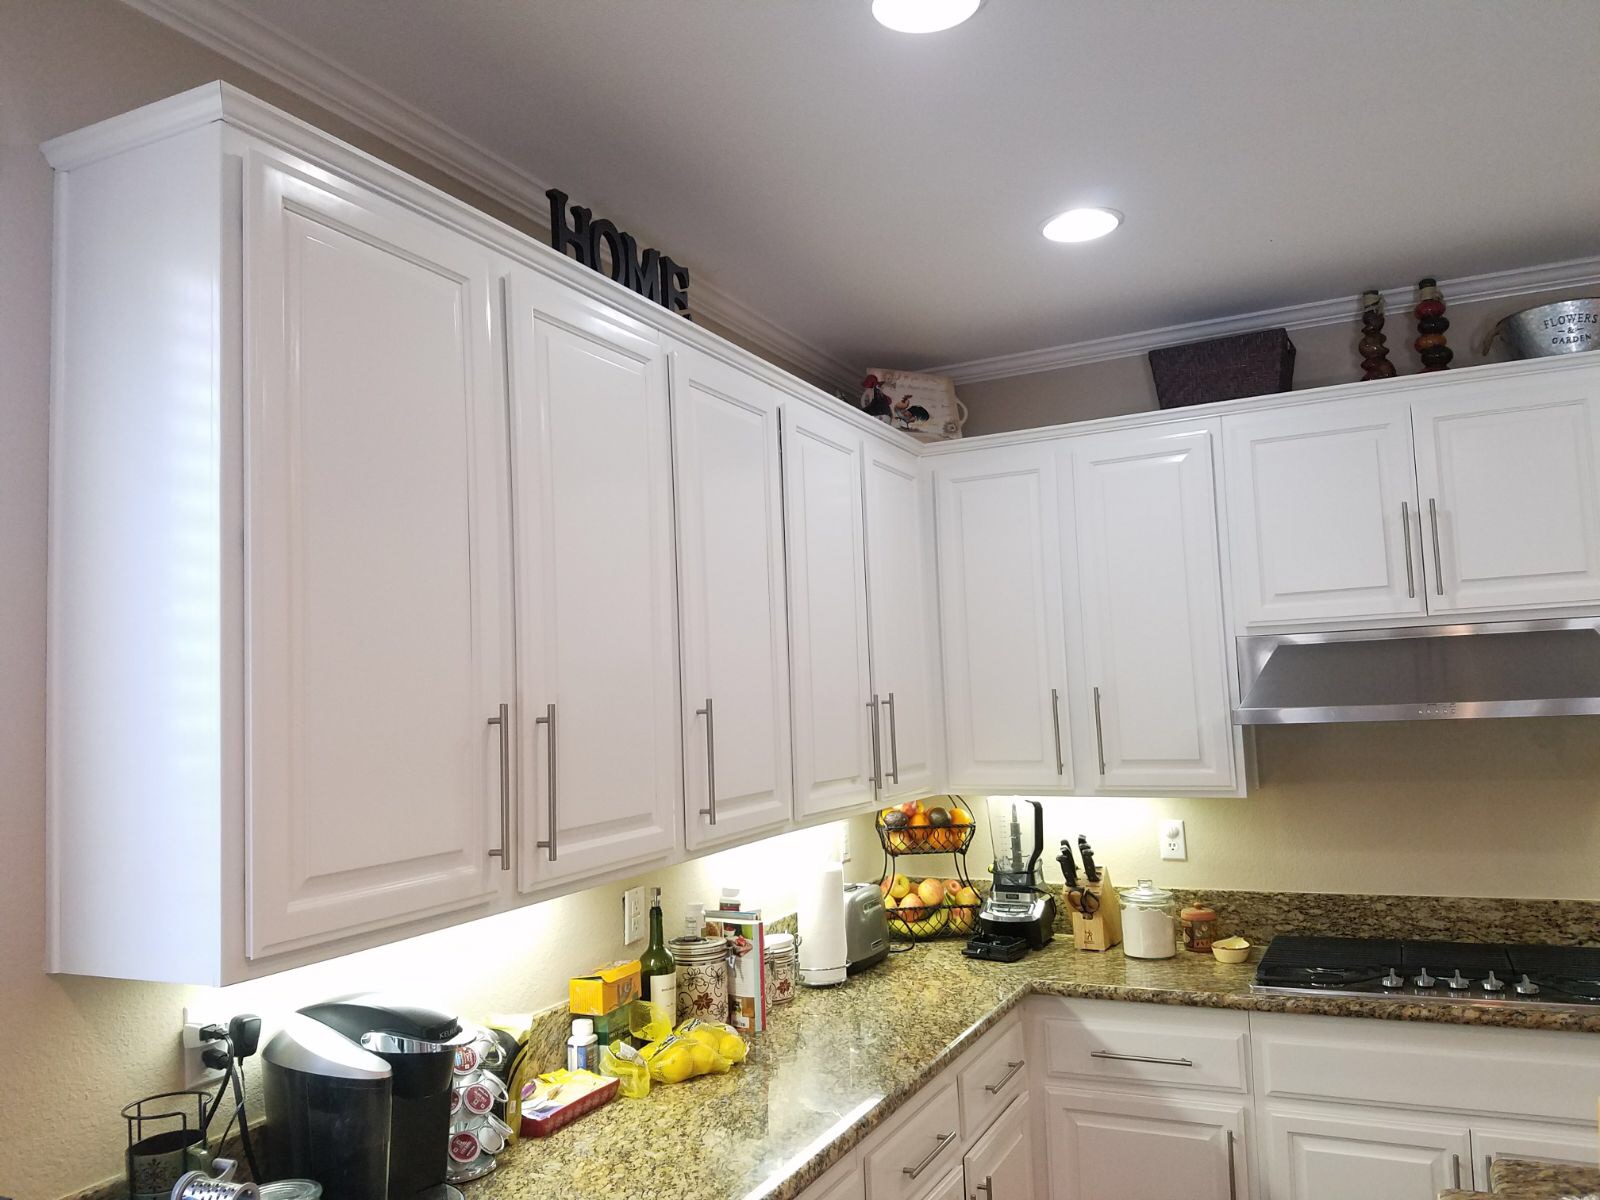 Cabinet painting in San Marcos, CA - CertaPro Painters